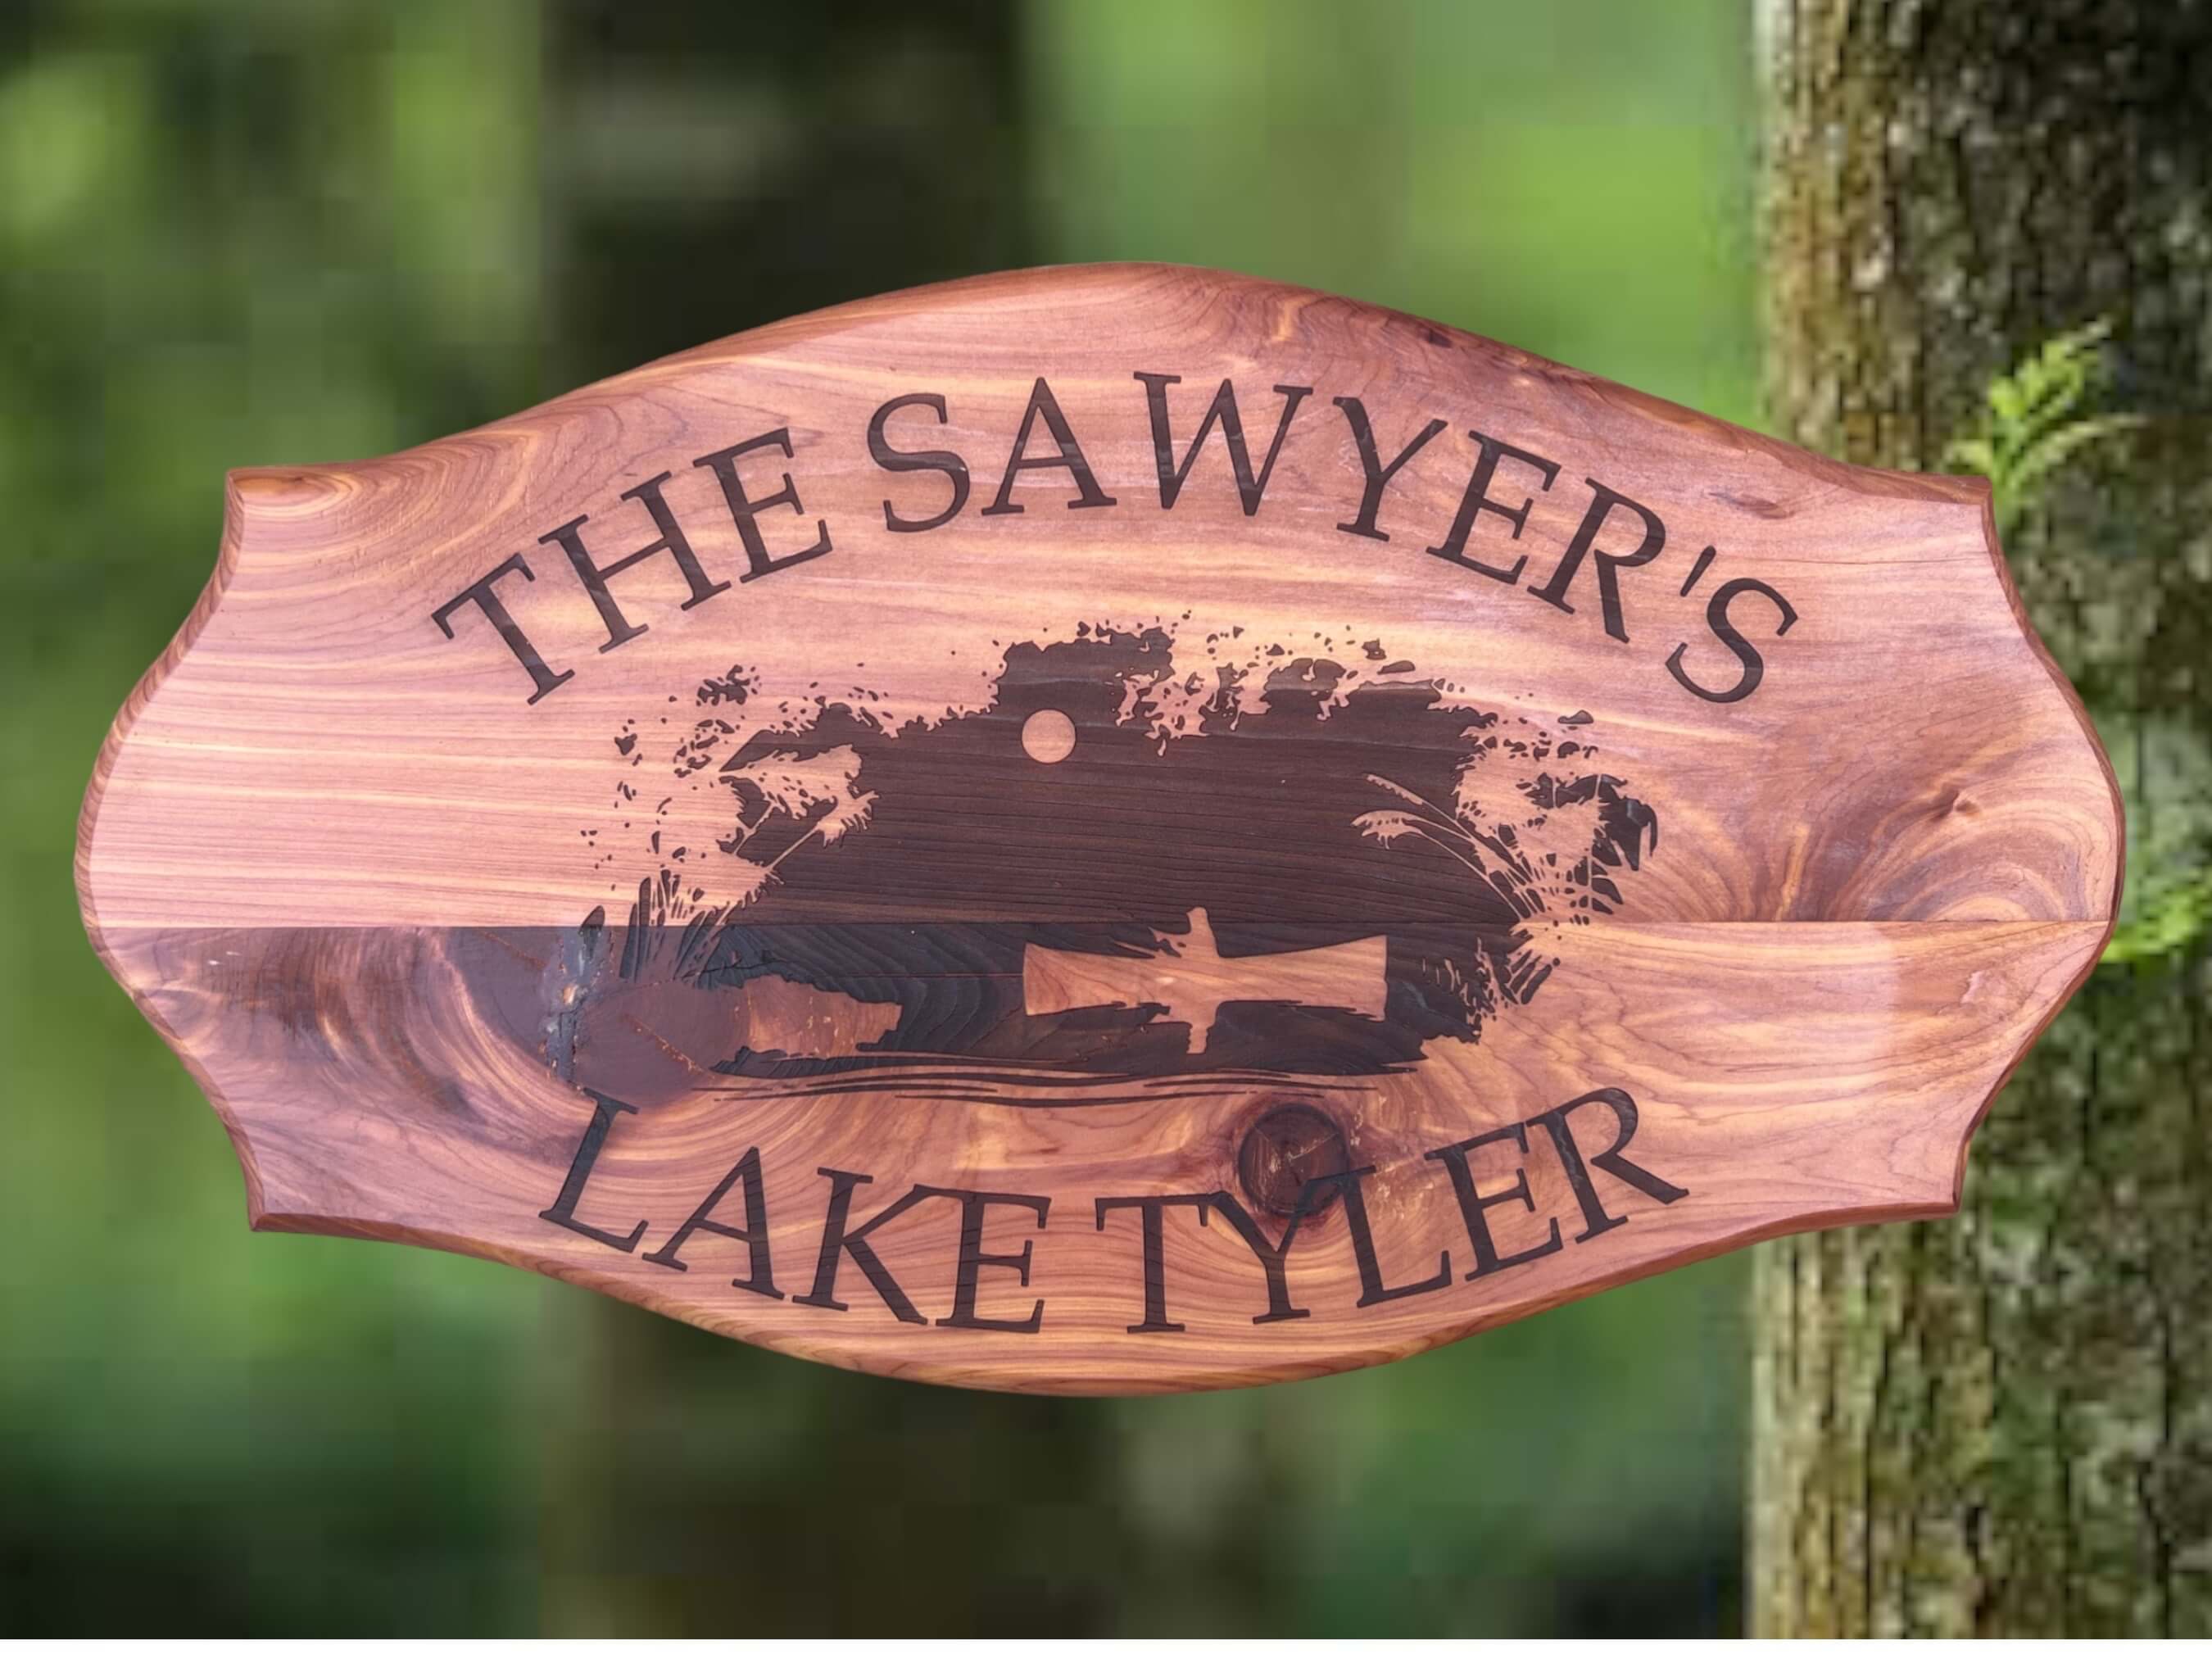 "Handmade Cedar Lake House Plaque with Personalization" Description: A handmade cedar plaque designed for lake house enthusiasts. The center of the sign depicts a laser-engraved image of a man fishing in a small boat. Customize it with your last name and lake name.